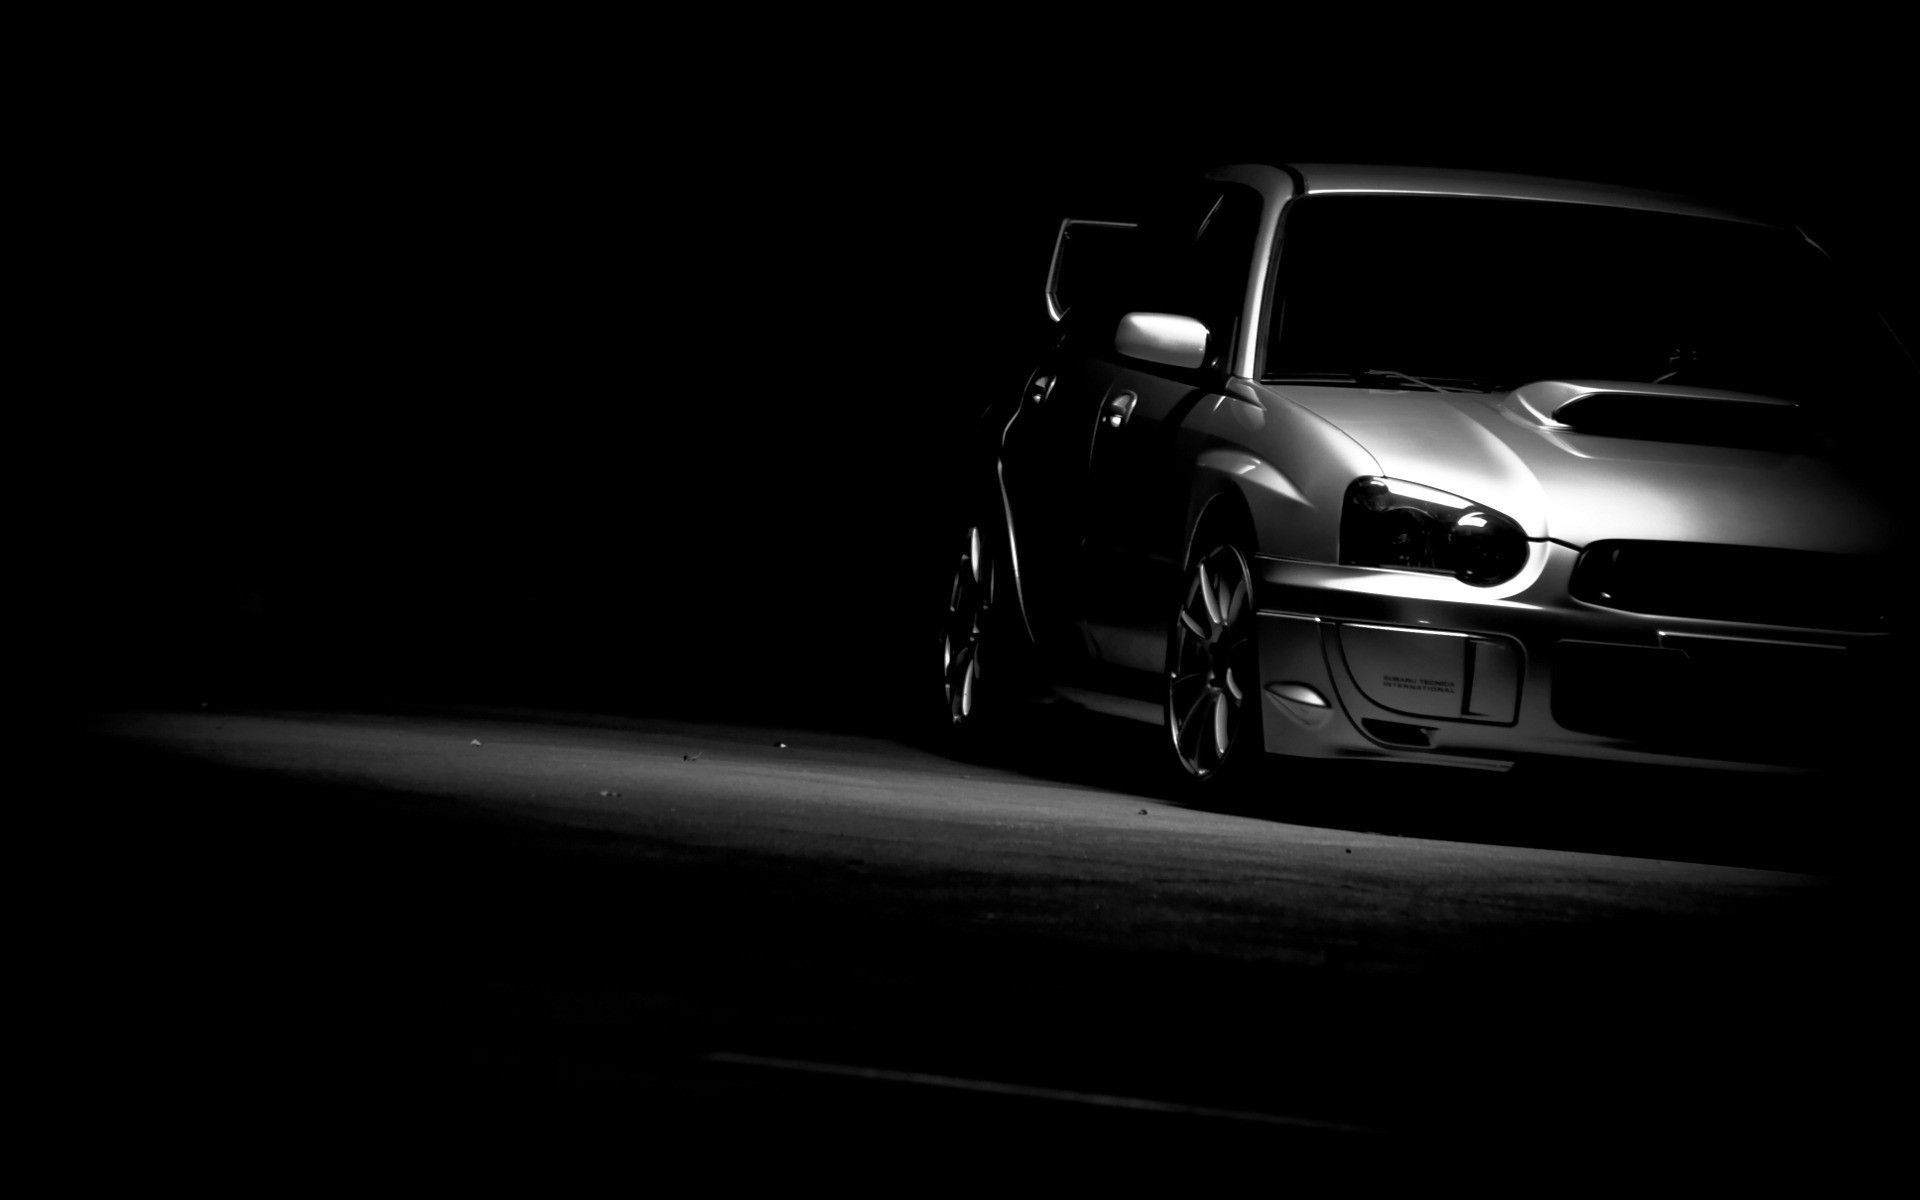 A car is parked in the dark. - JDM